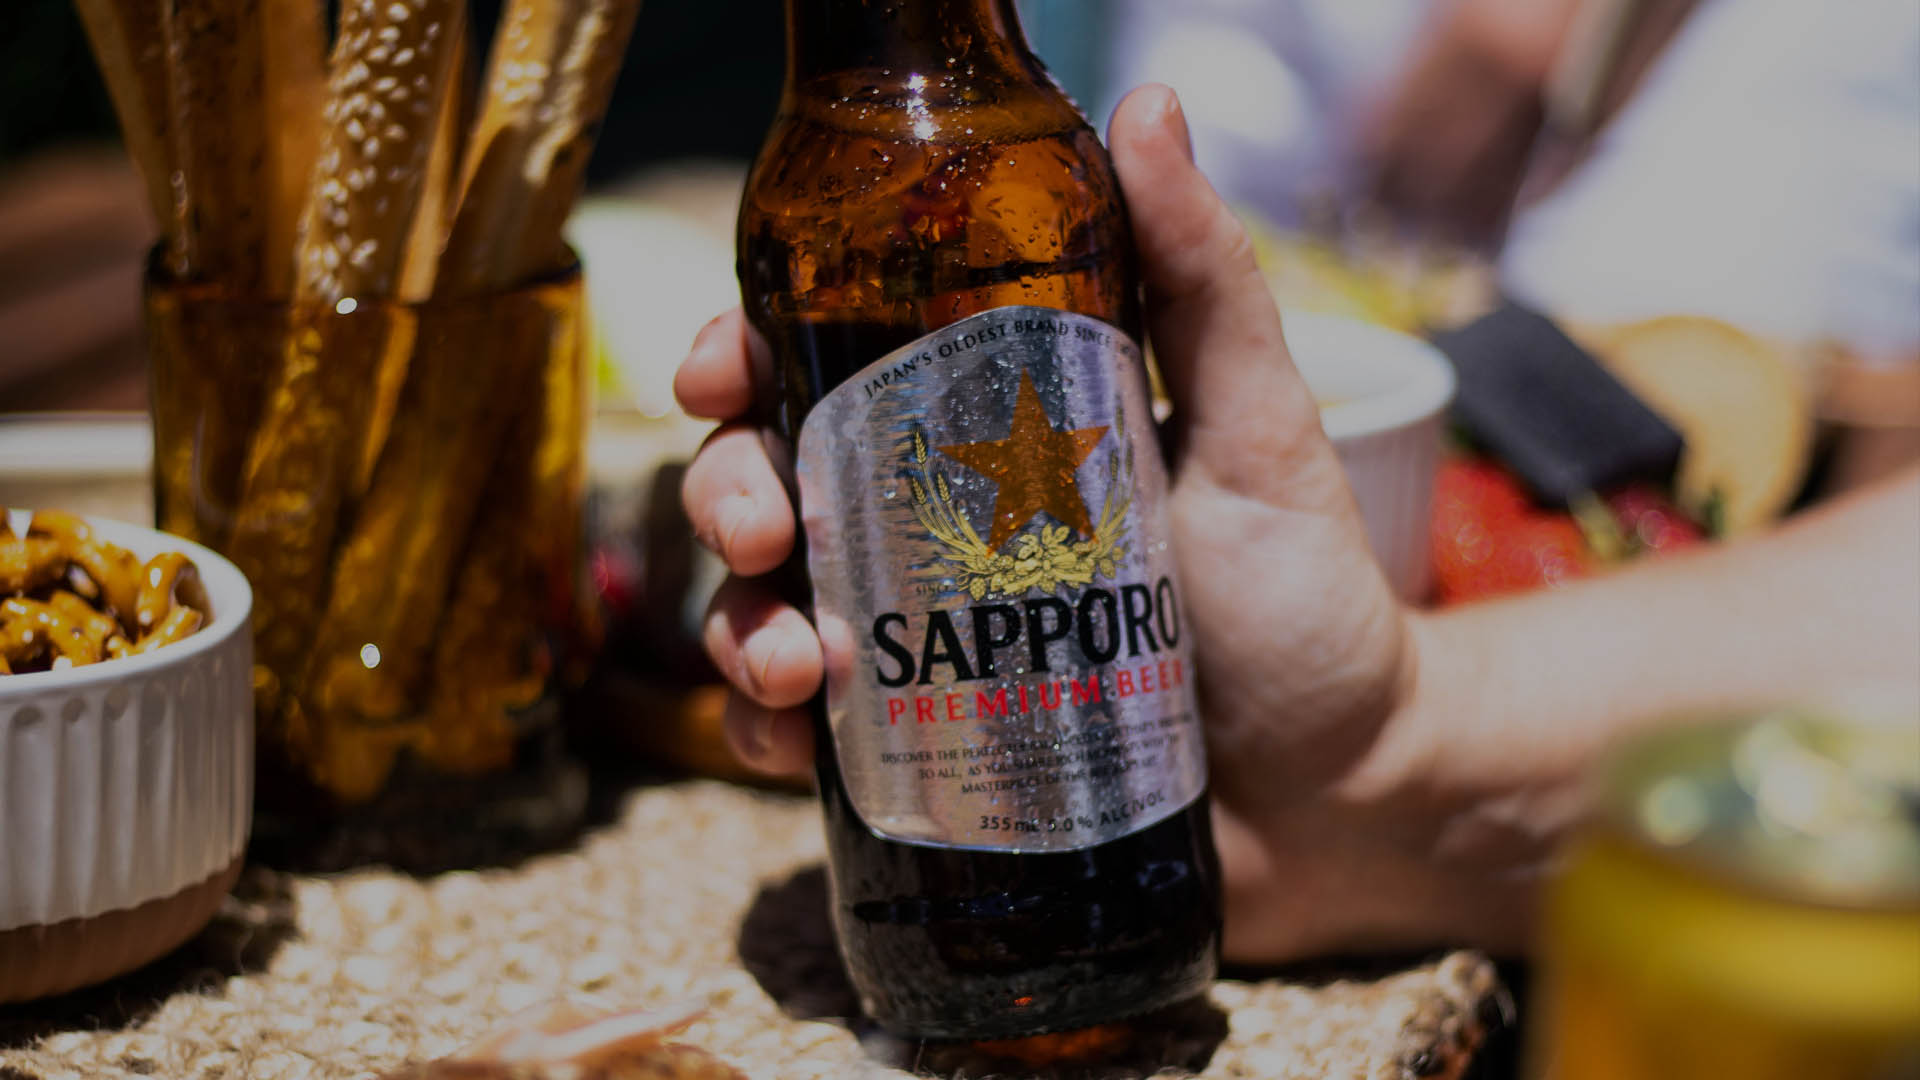 Sapporo and KWP